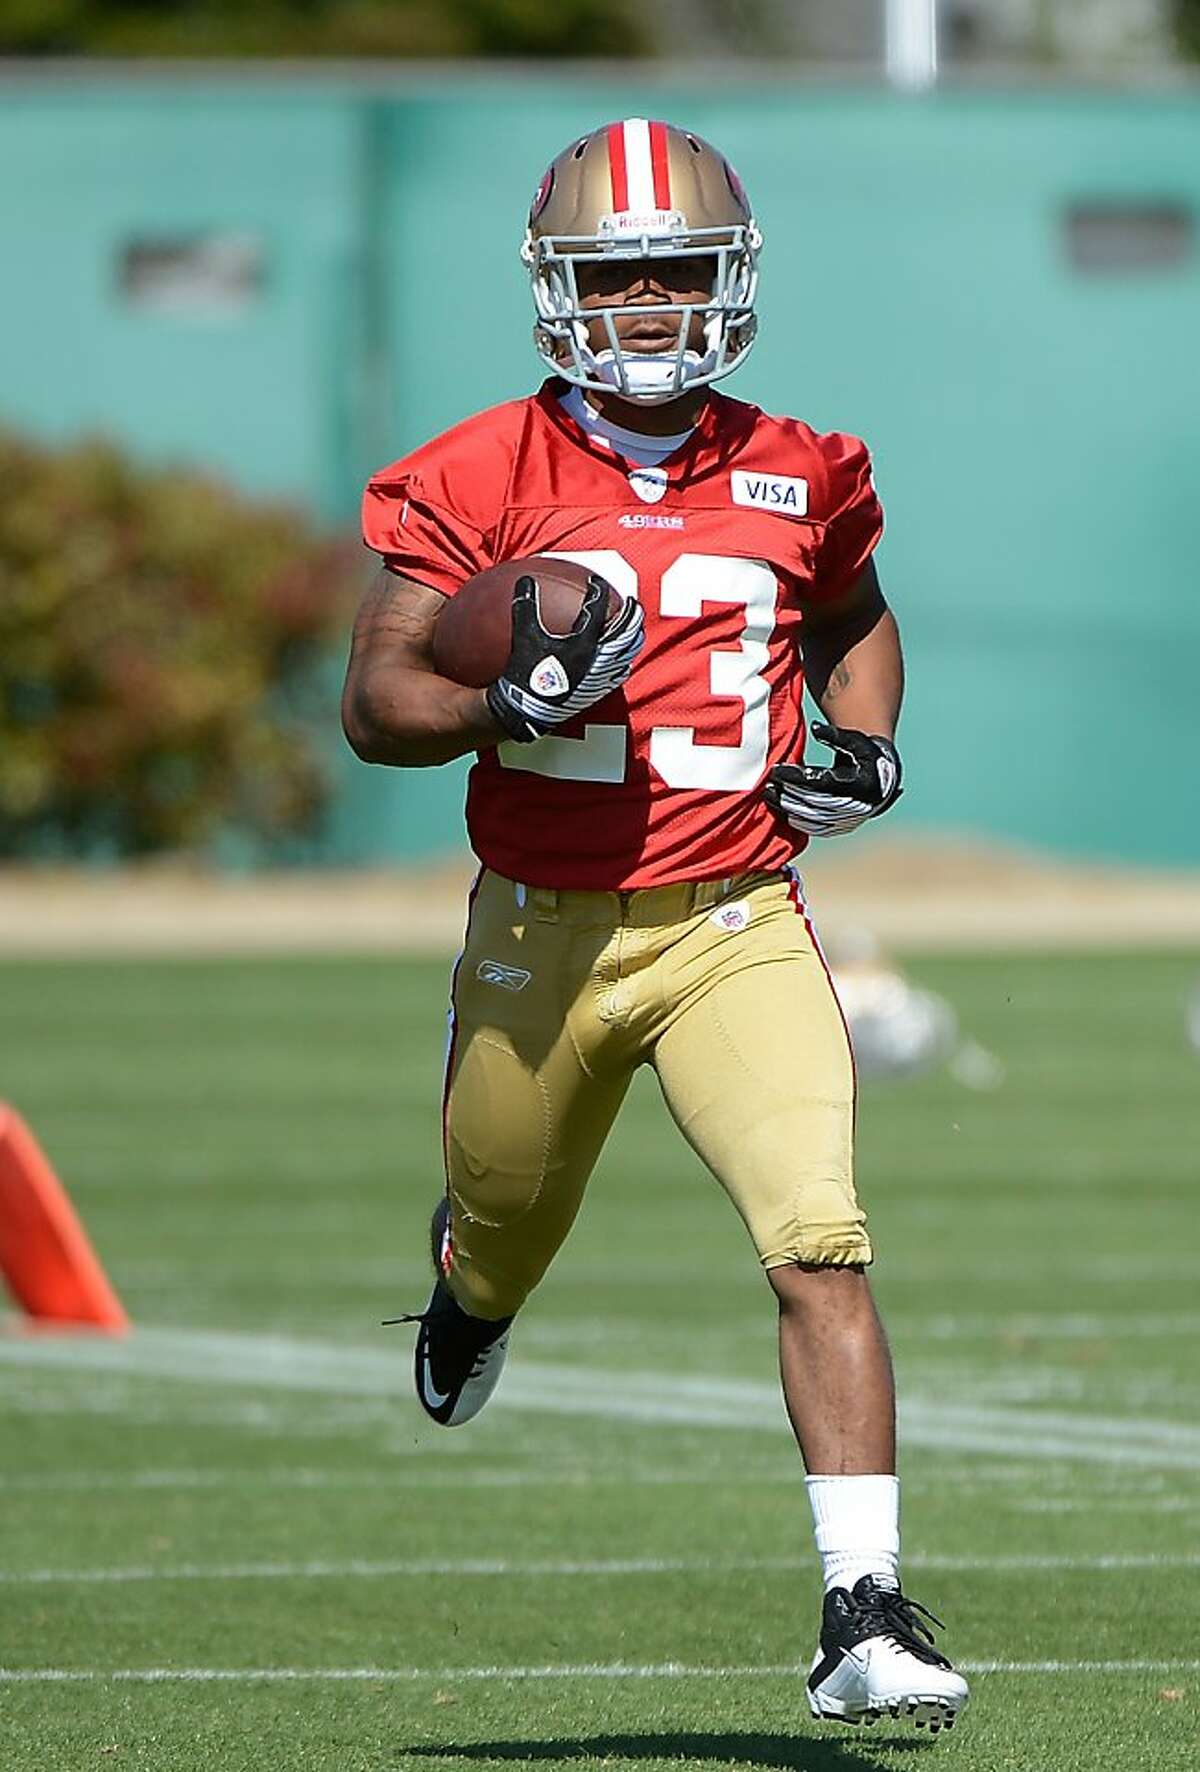 SANTA CLARA, CA - MAY 11: LaMichael James #23 of the San Francisco 49ers carries the ball up field during Rookie Minincamp at the San Francisco 49ers practice facility on May 11, 2012 in Santa Clara, California. (Photo by Thearon W. Henderson/Getty Images)